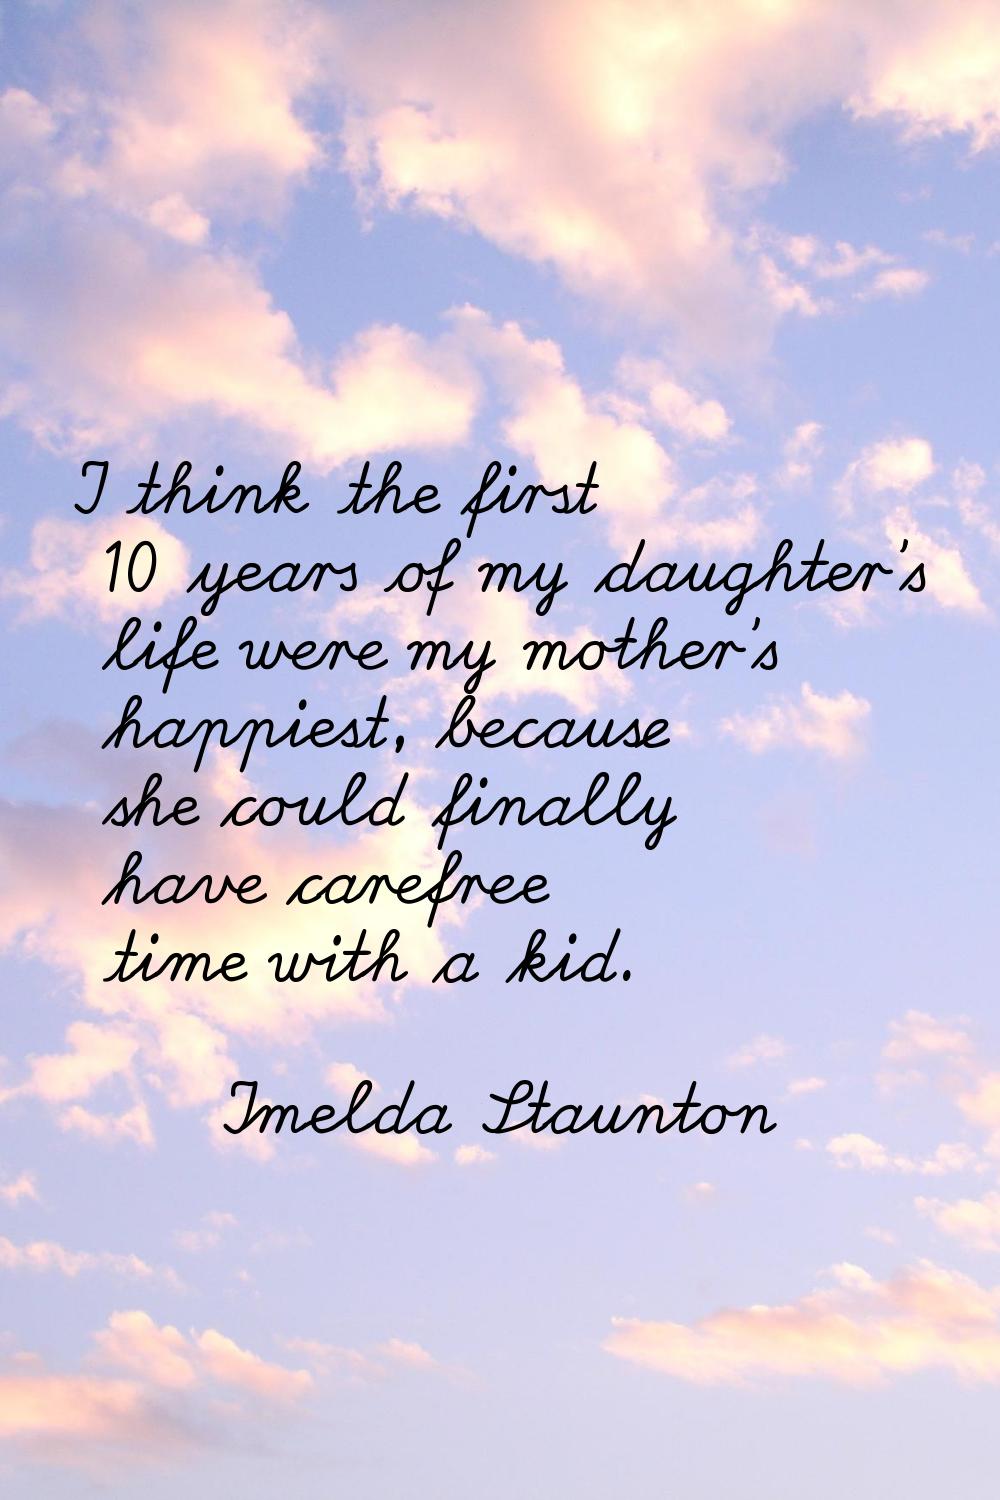 I think the first 10 years of my daughter's life were my mother's happiest, because she could final